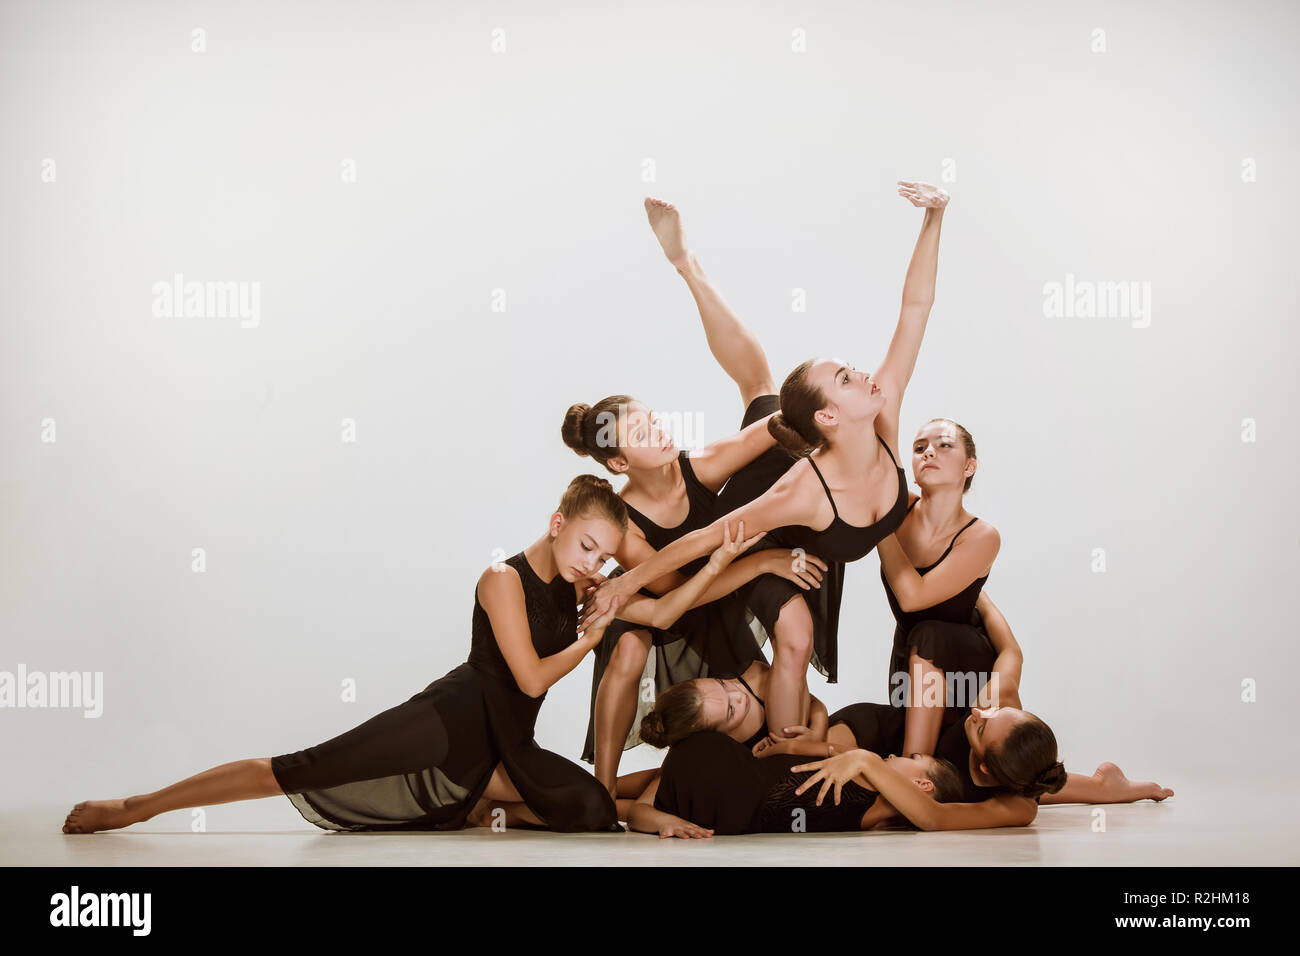 You are beautiful.: Dance pose idea for groups of 10!